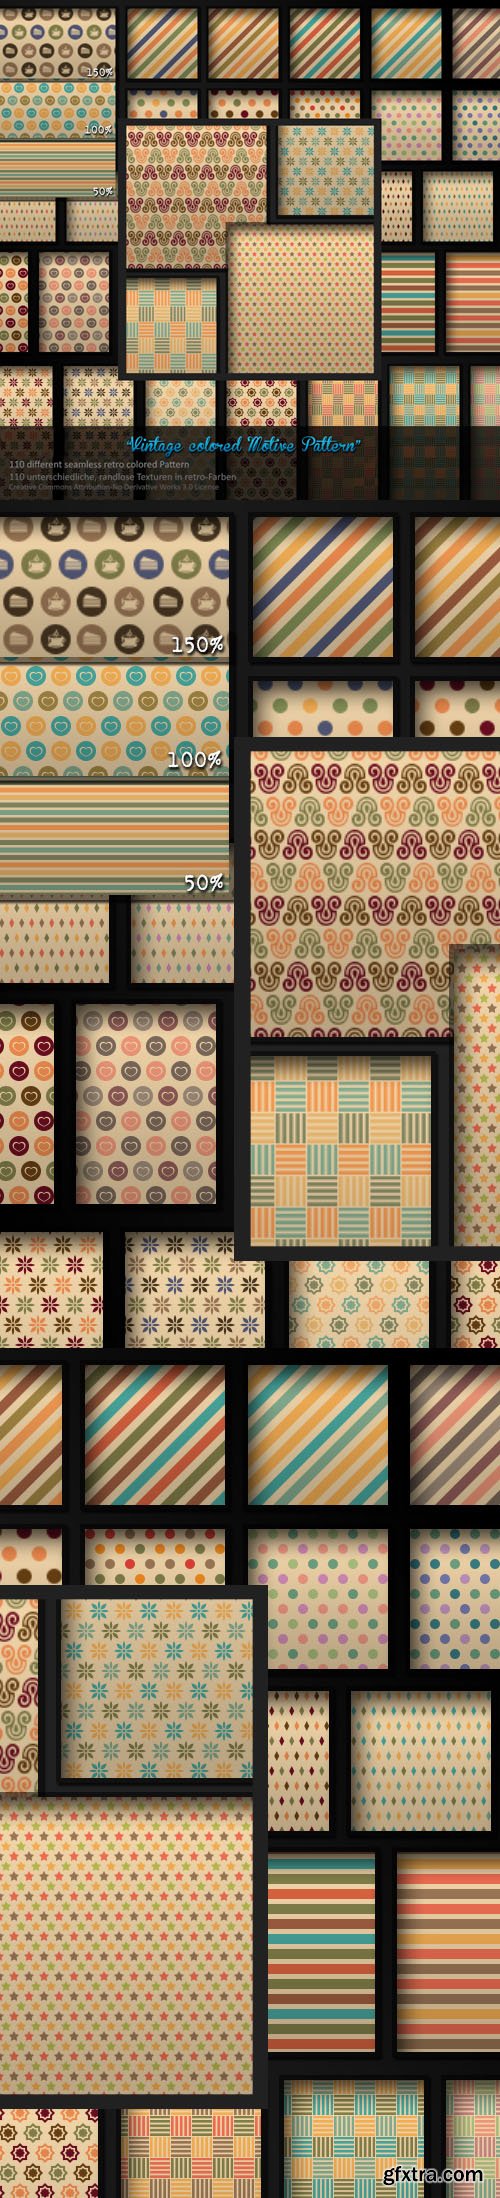 110 Photoshop Pattern Styles in Vintage Color Schemes